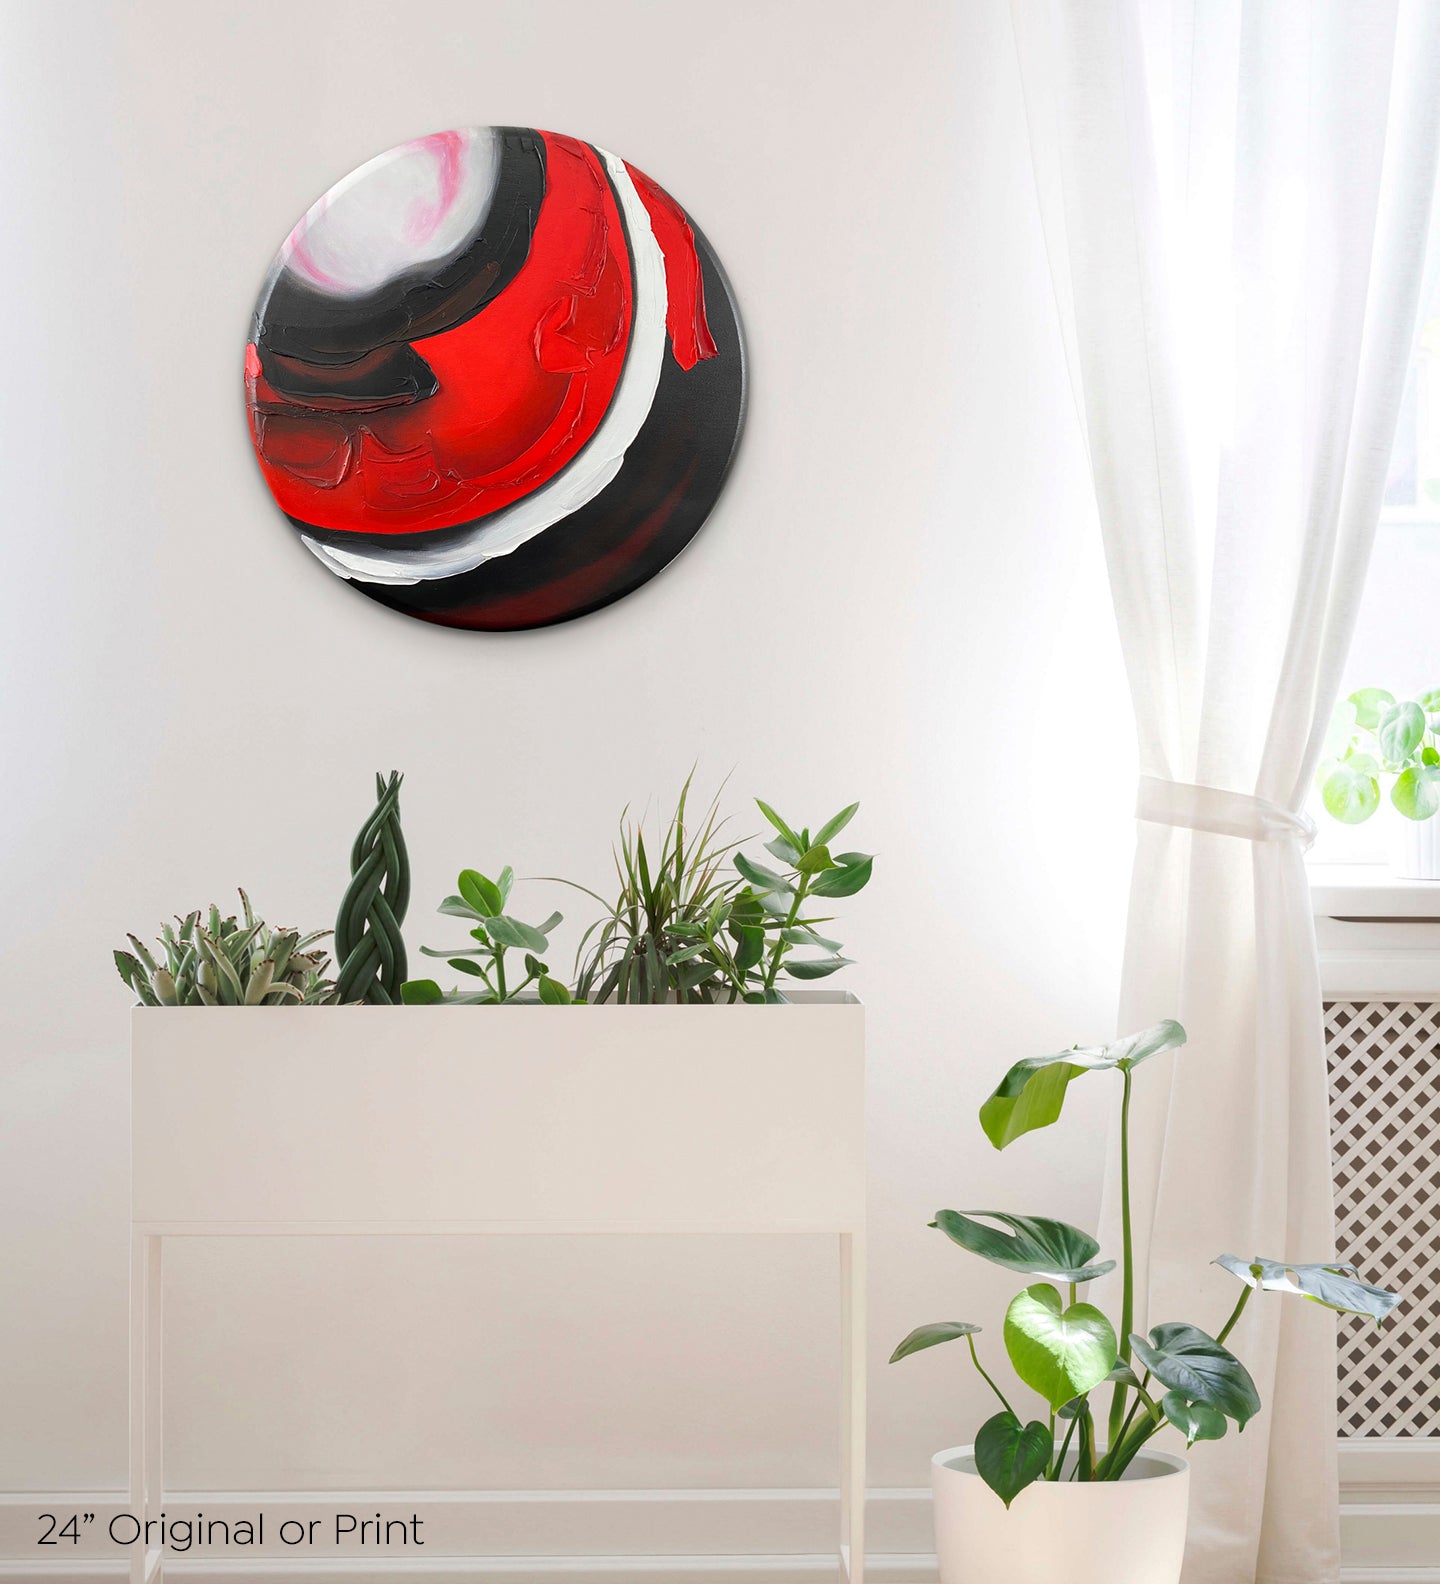 Abstract, acrylic and mixed-media 24” original or print on a round canvas with curved-edges shown on a white wall in a contemporary living room